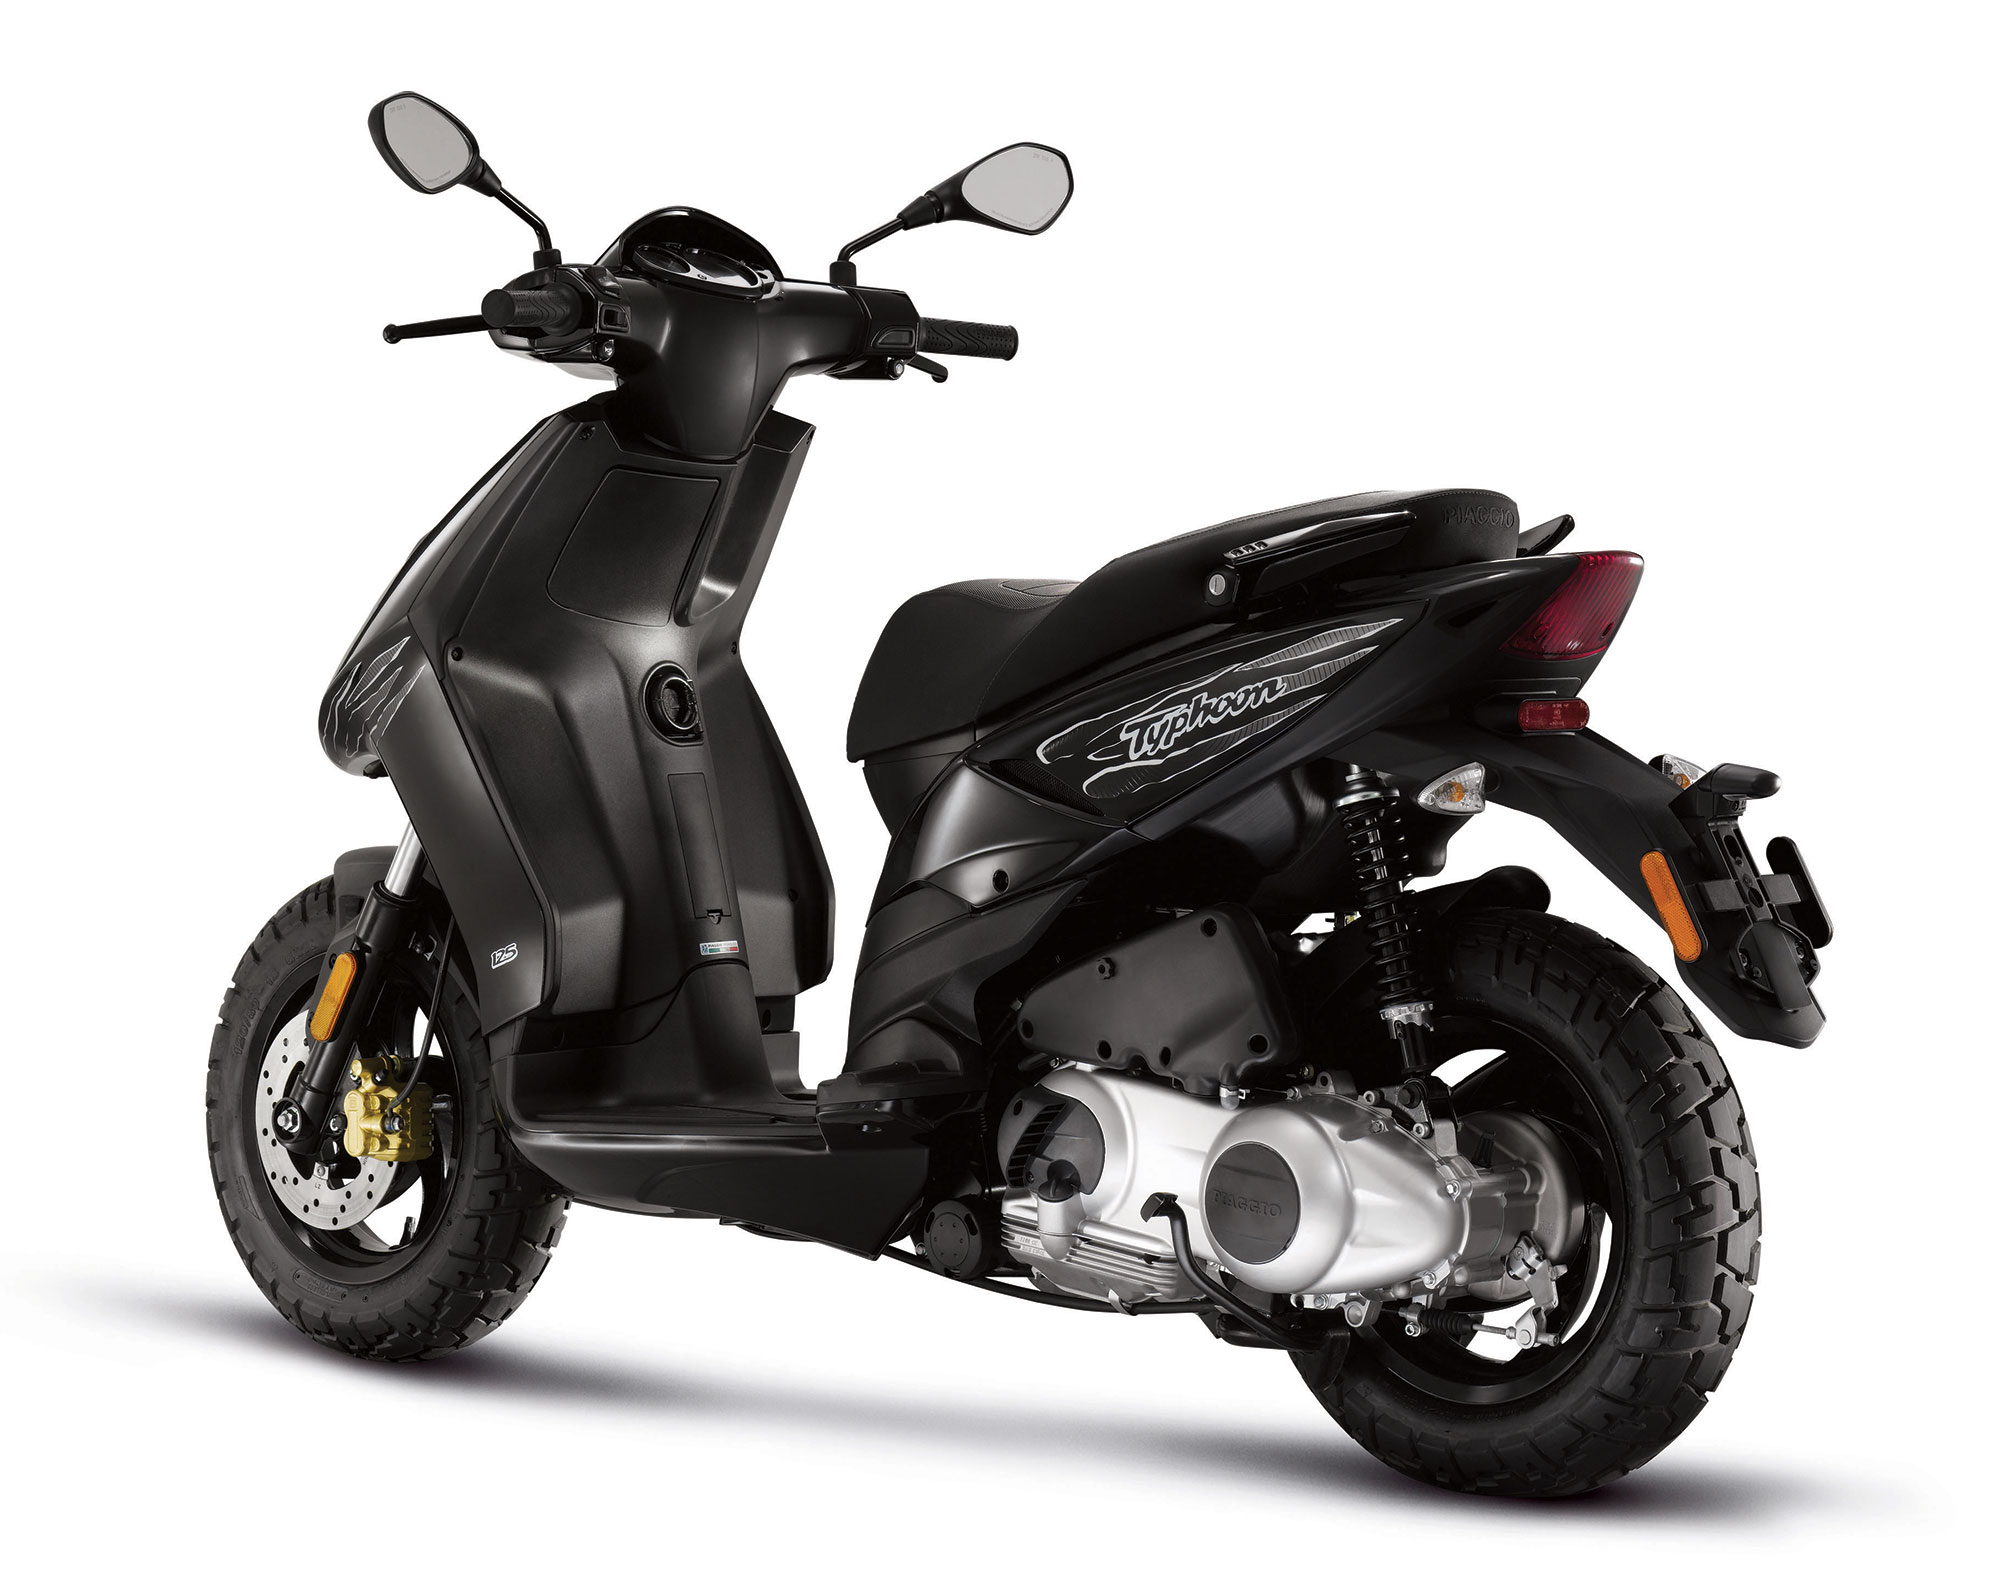 anden Forvirrede grinende 2013 Piaggio Typhoon 125 Scooter Review